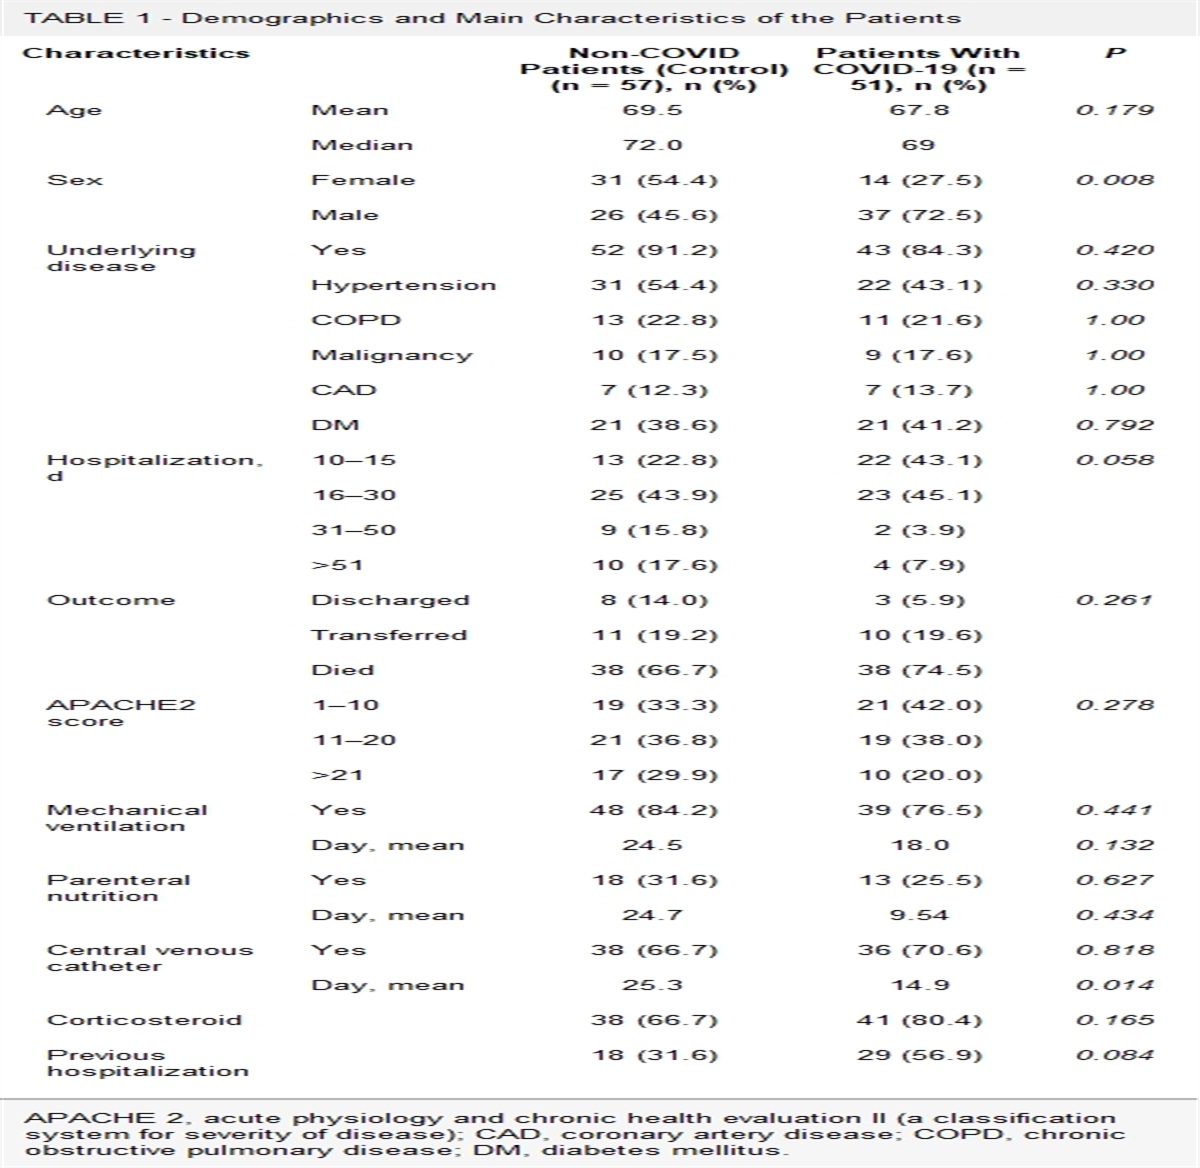 Comparison of COVID-19 and Non–COVID-19 Patients in Intensive Care Unit for Secondary Infections